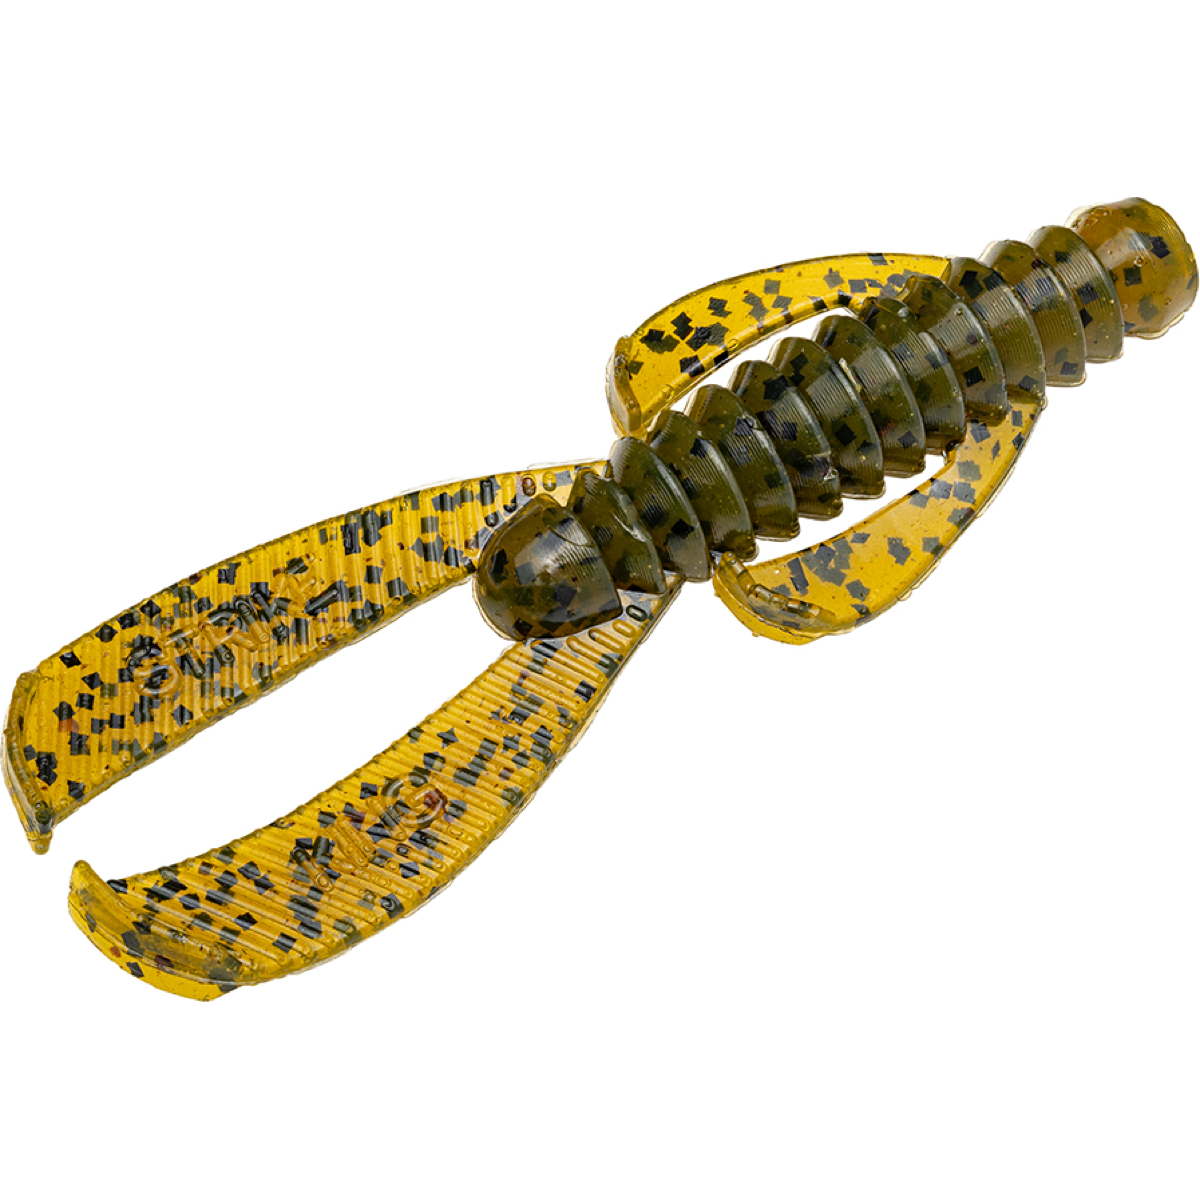 Photo of Strike King Rage Ned Bug for sale at United Tackle Shops.